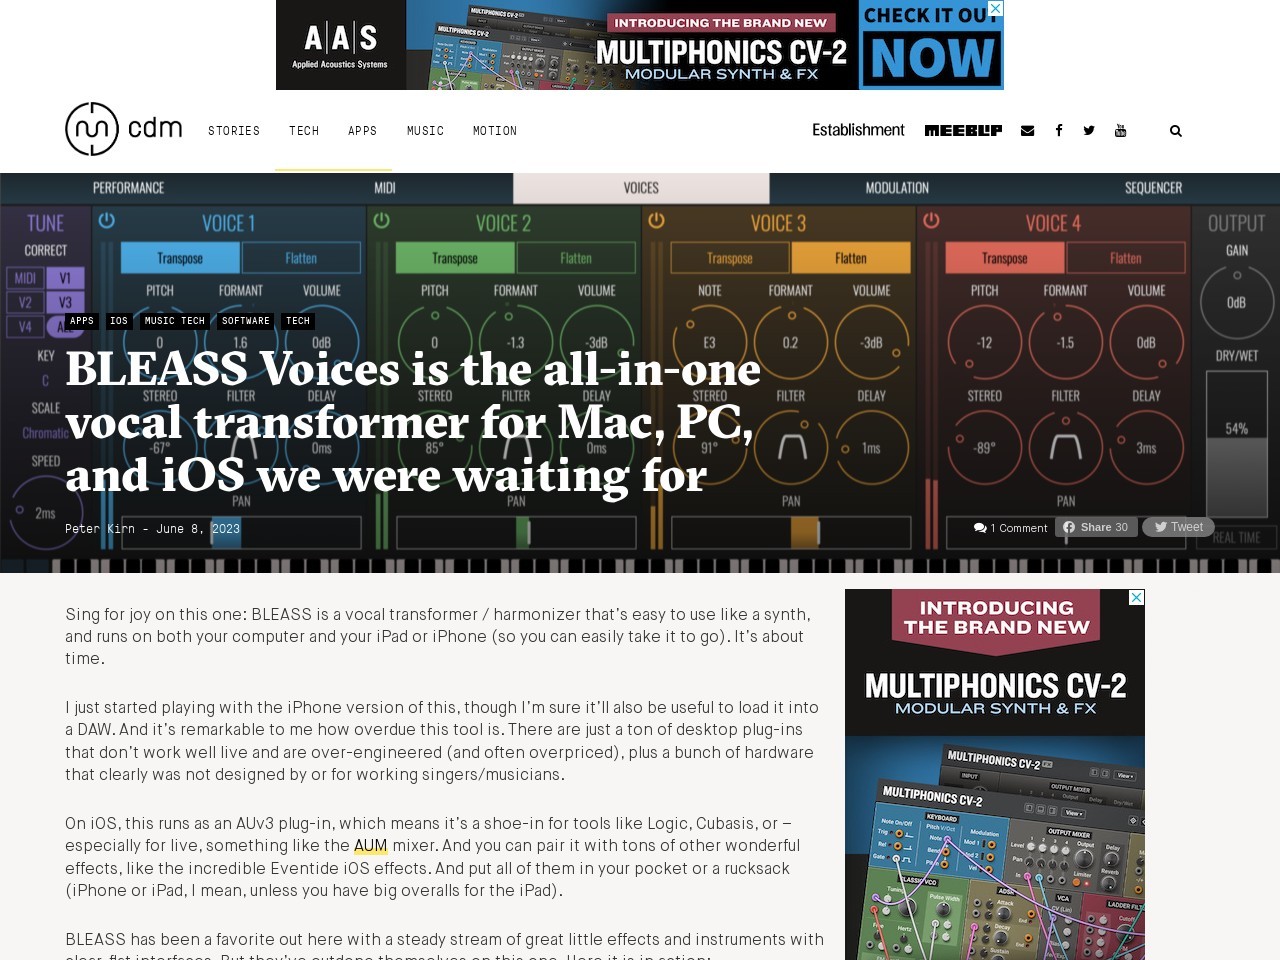 BLEASS Voices is the all-in-one vocal transformer for Mac, PC, and iOS we were waiting for - CDM Create Digital Music